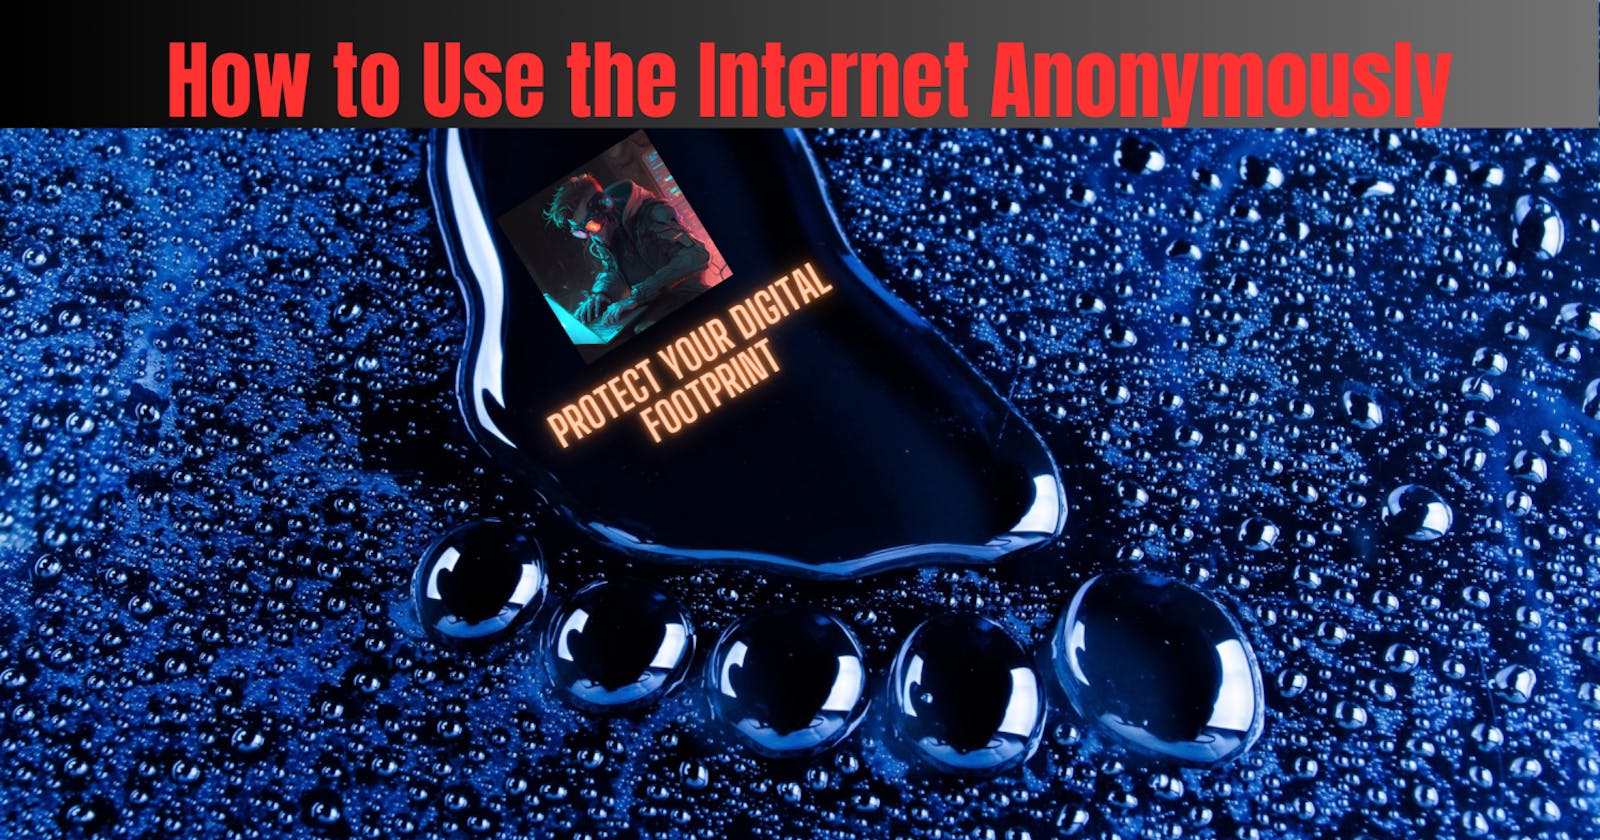 Protect Your Digital Footprint: How to Use the Internet Anonymously